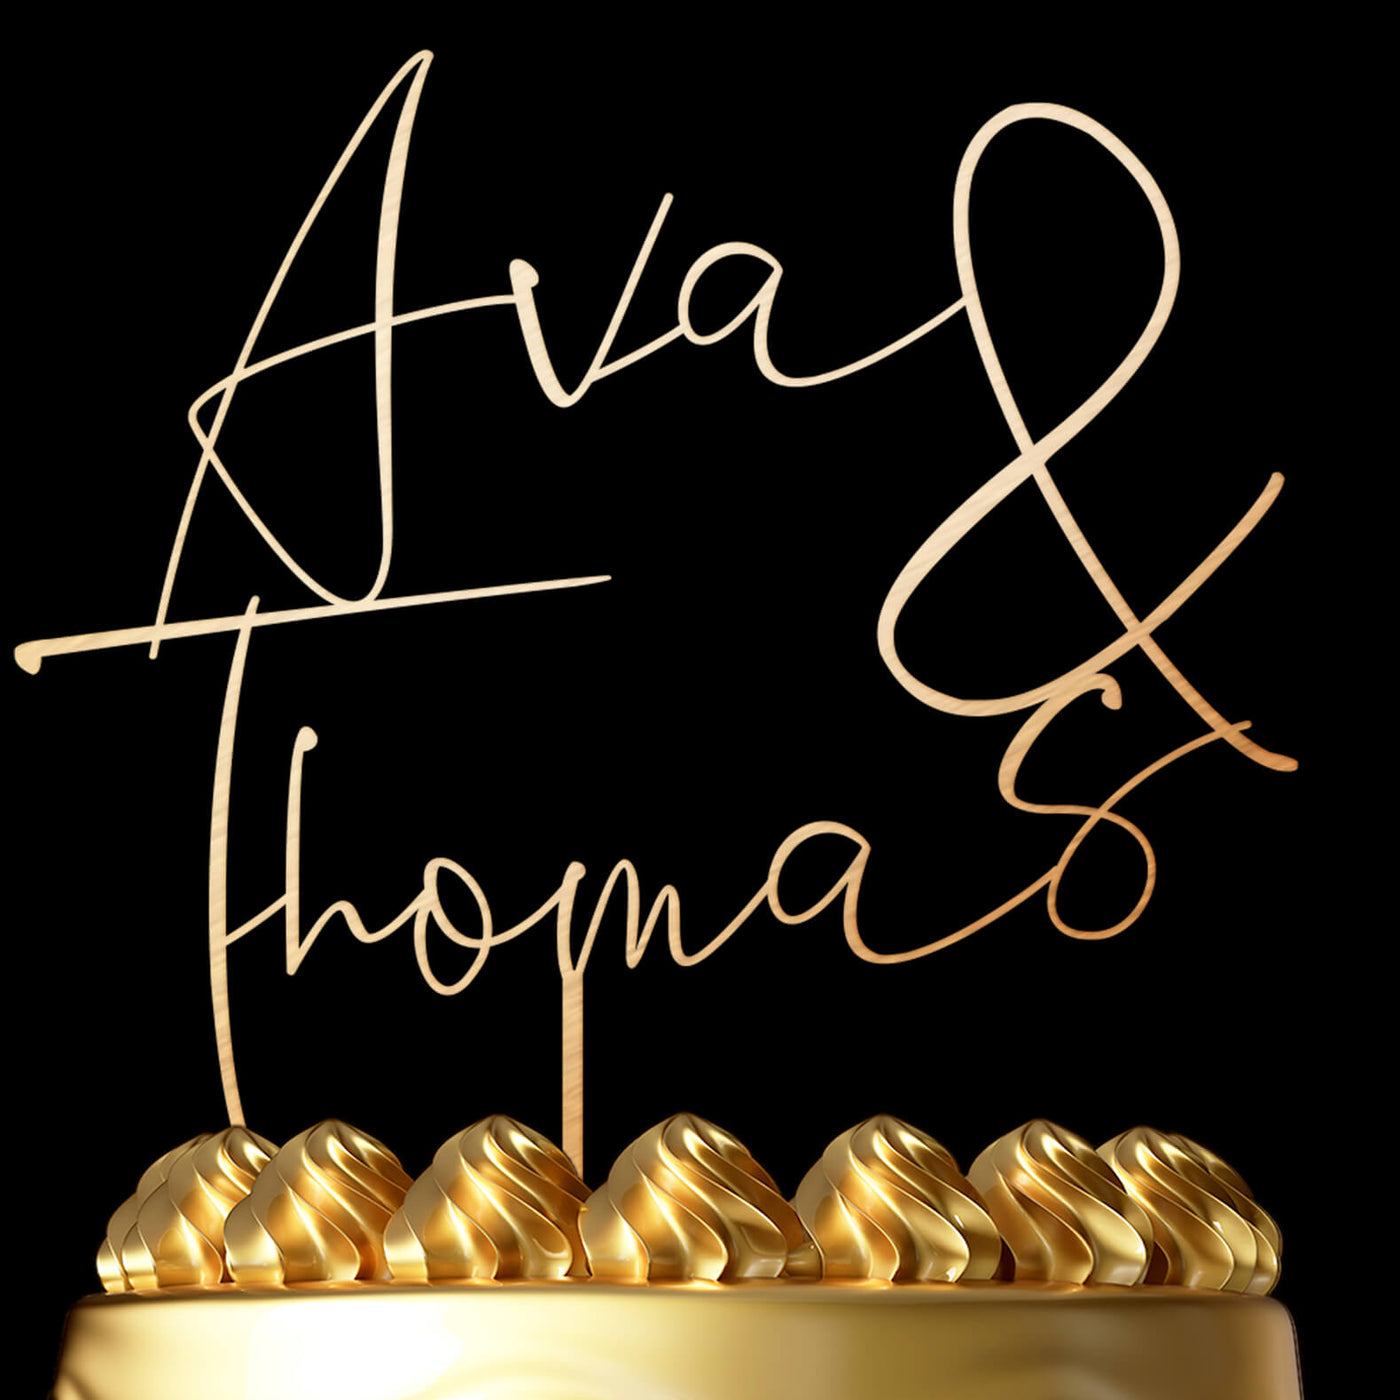 Personalized Cake Topper Ava - Wedding Cake Topper by Luxtomi